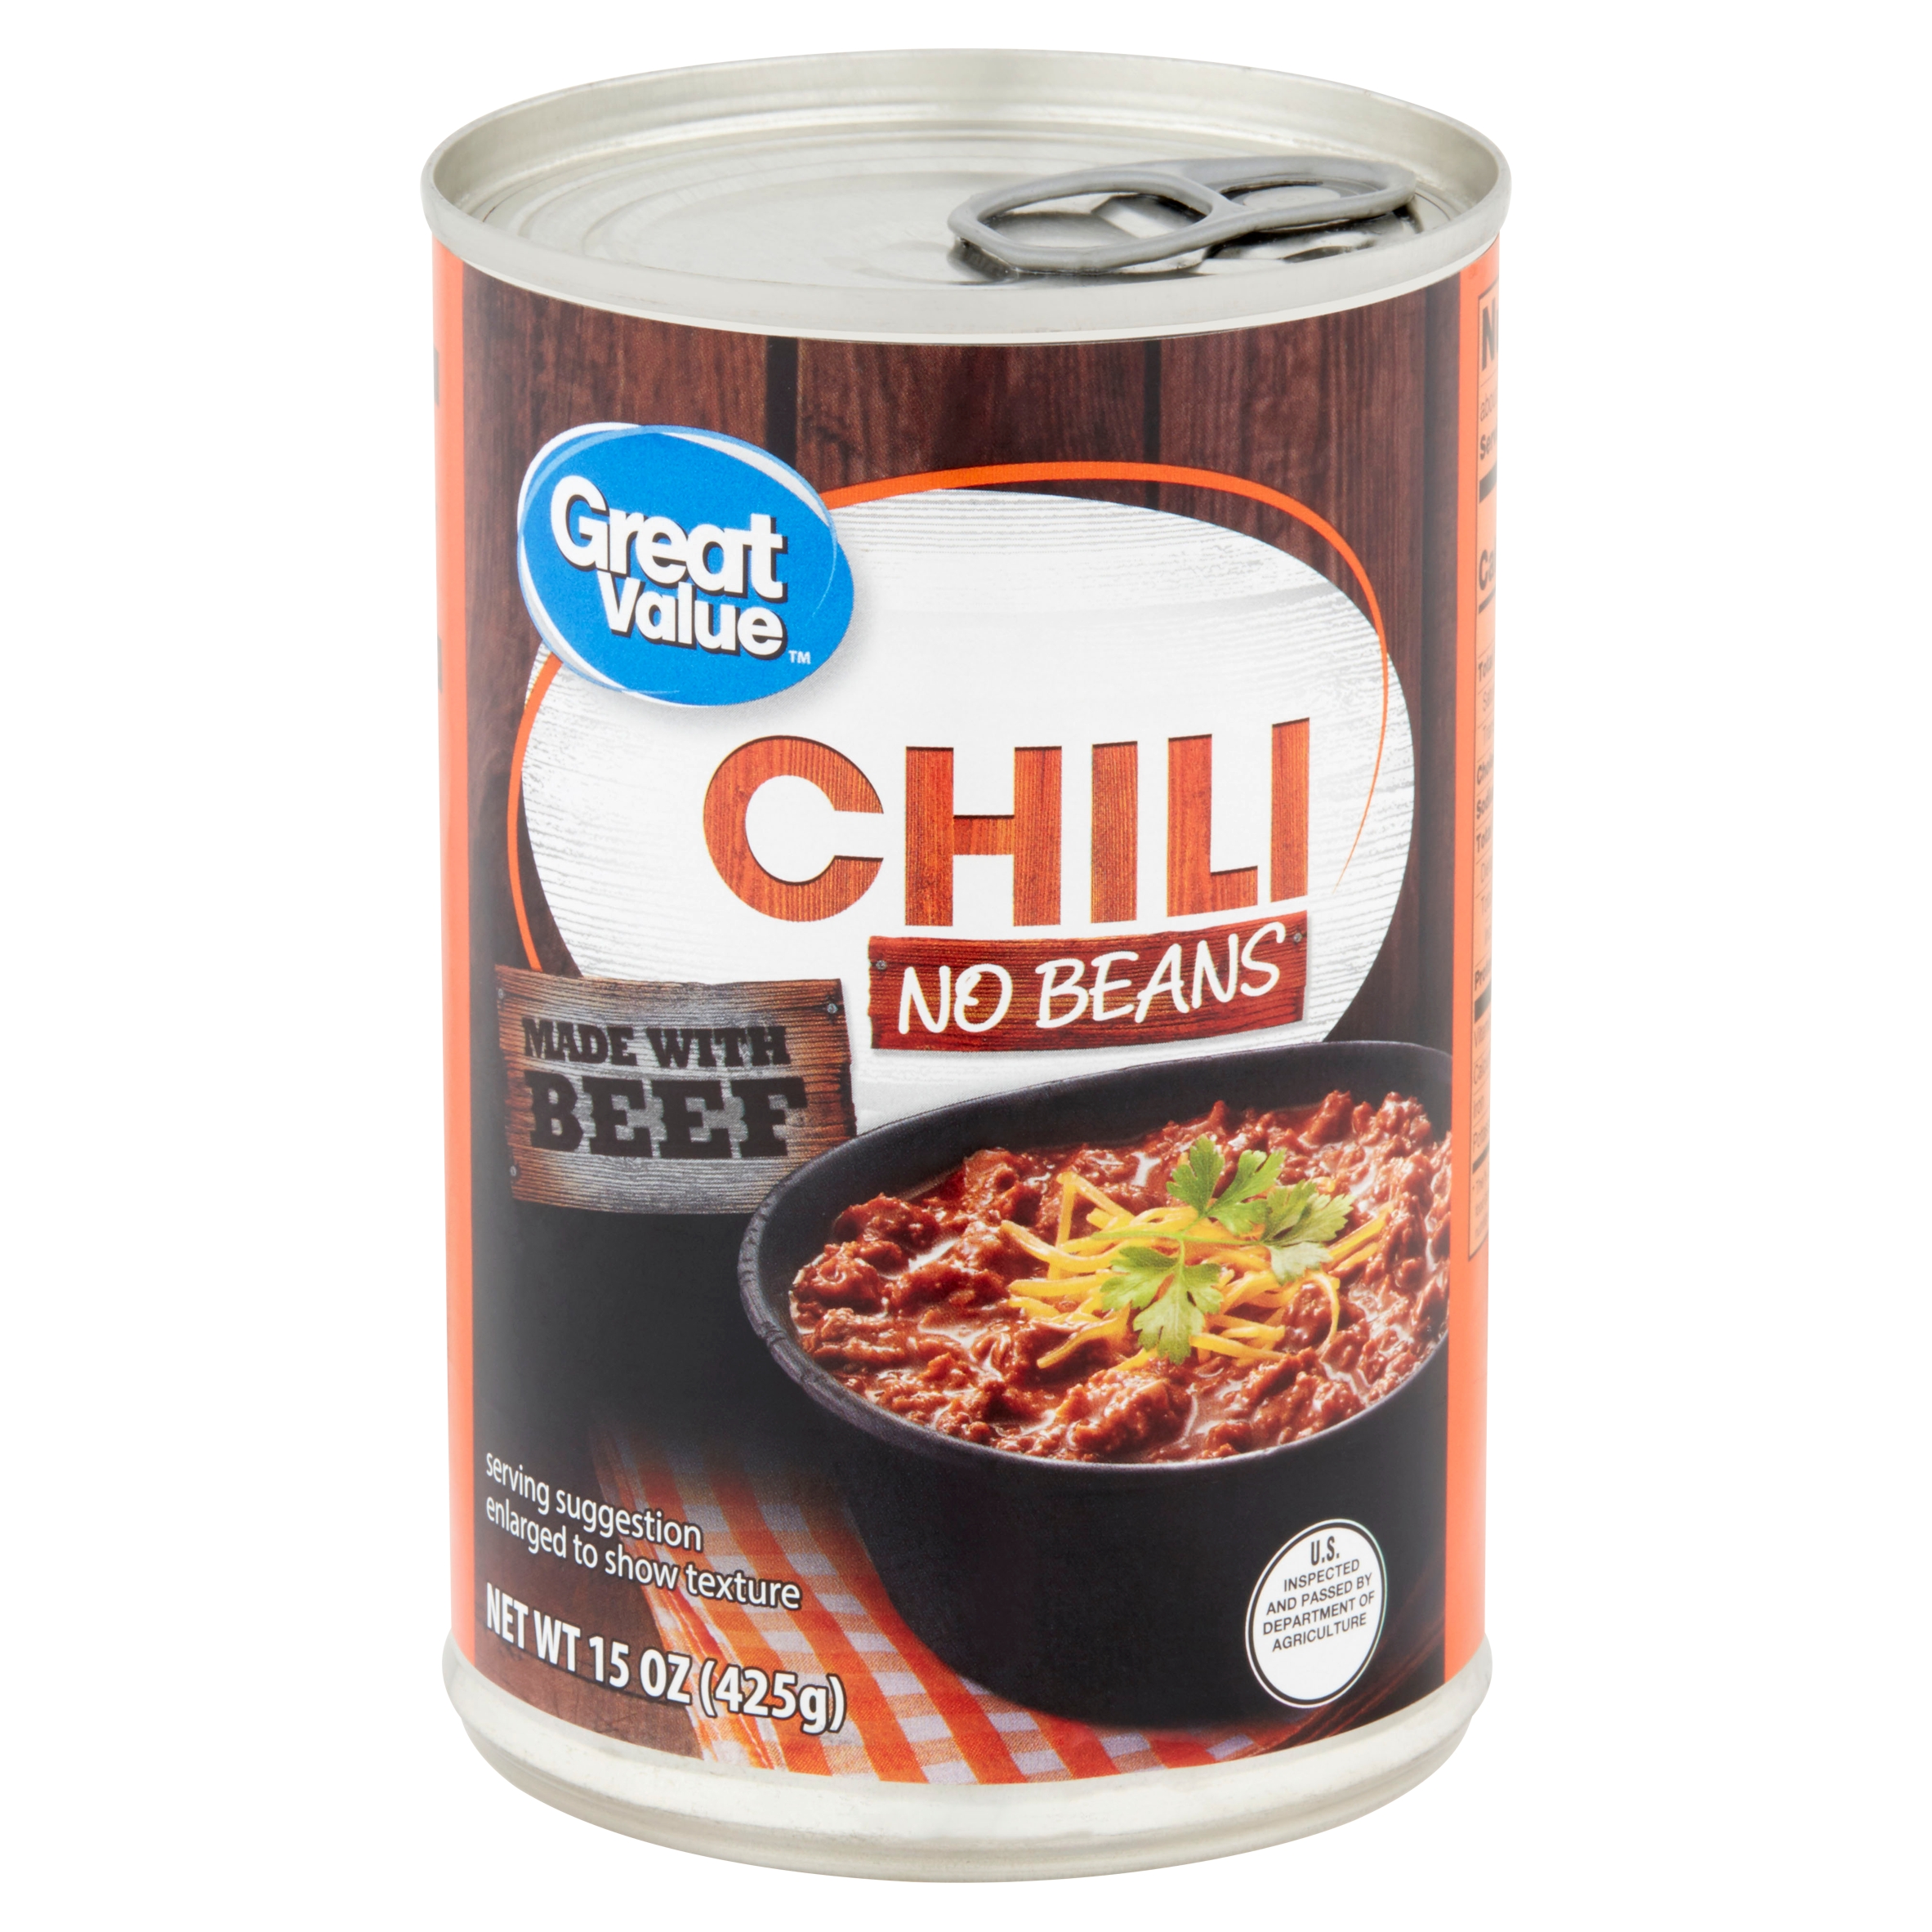 Great Value Chili No Beans, 15 Oz Image